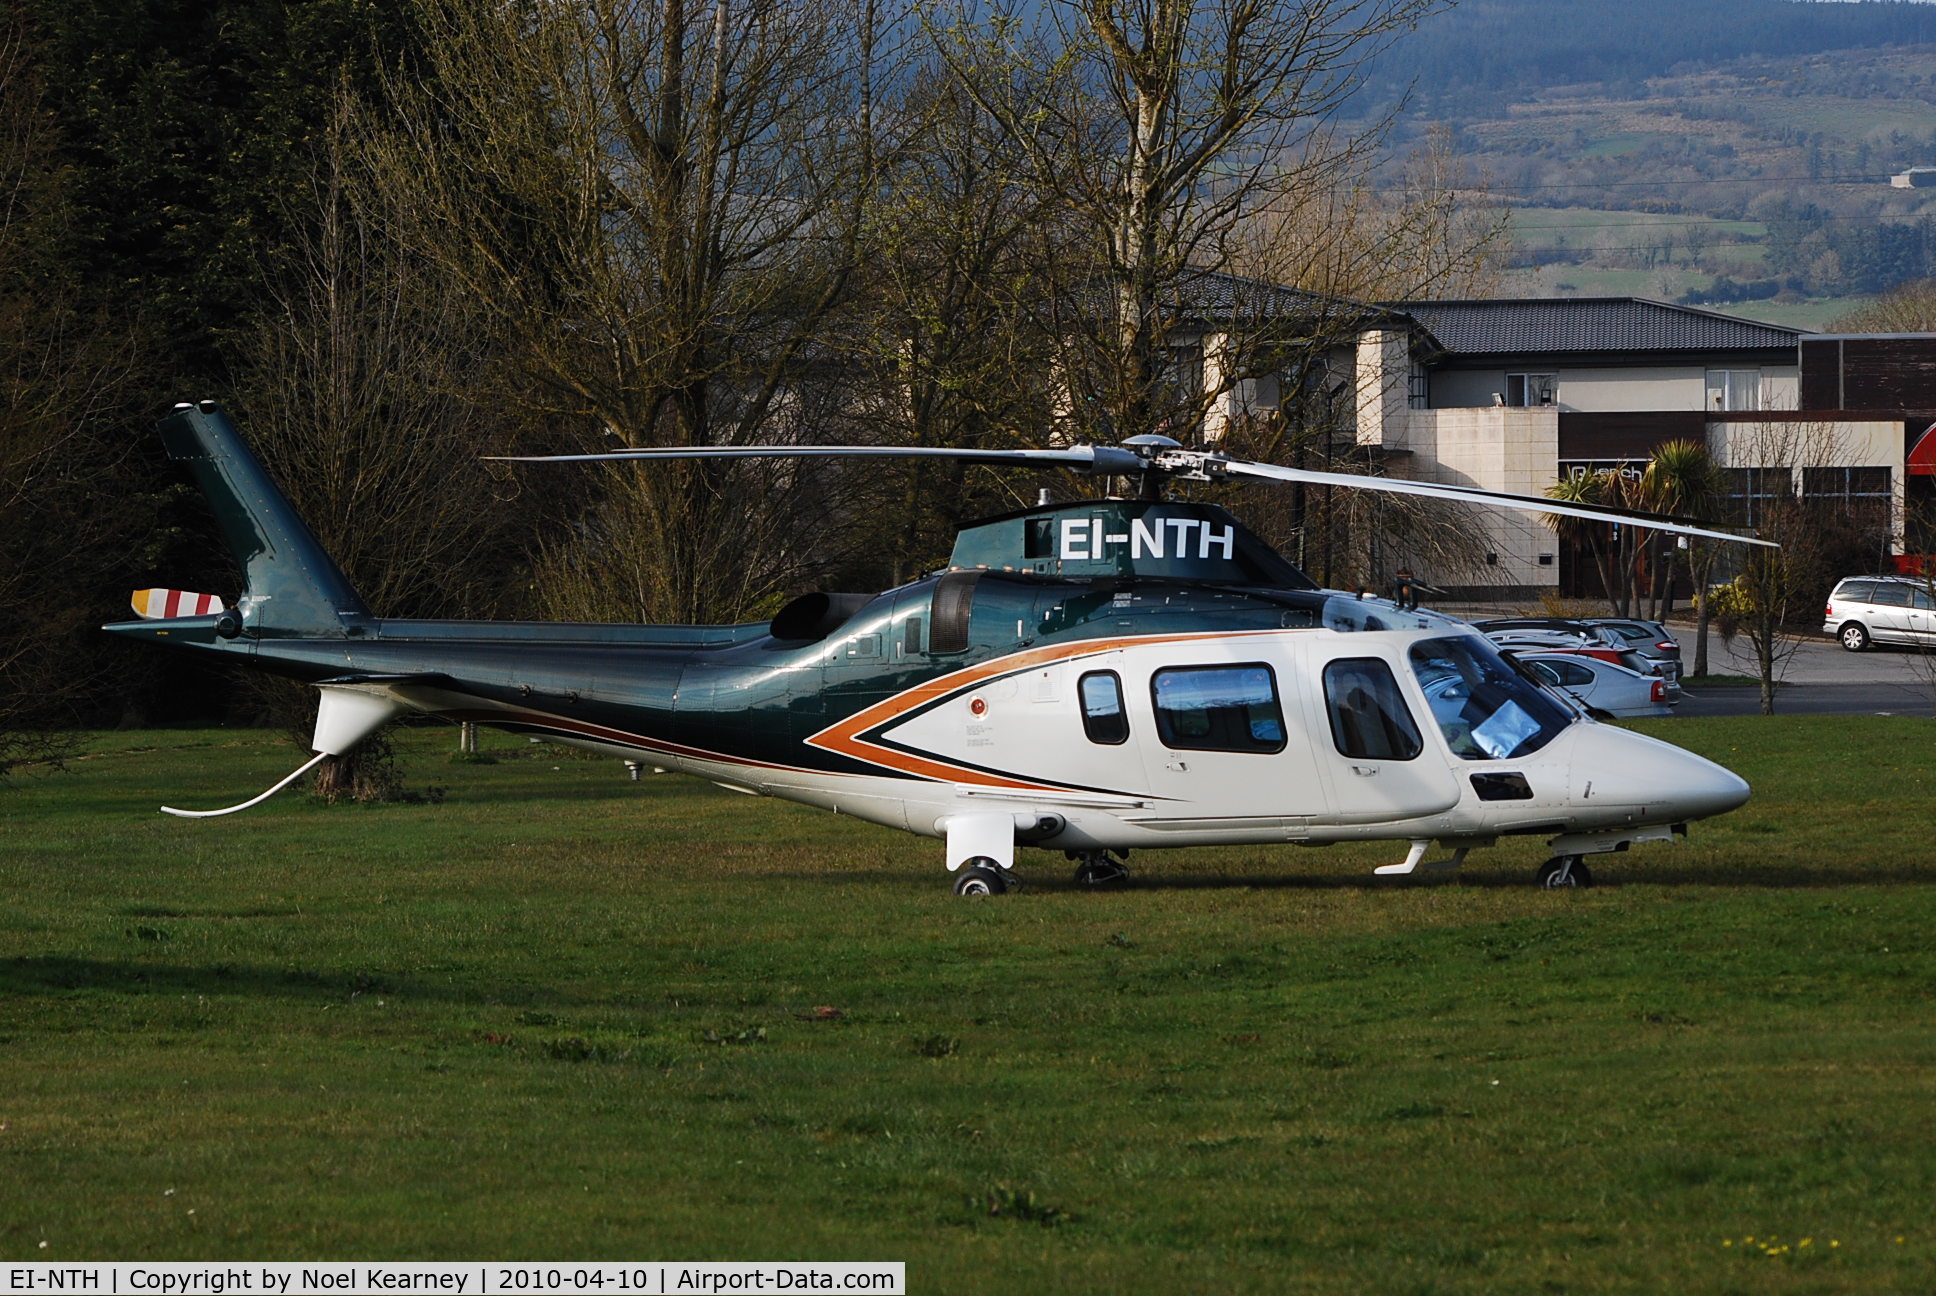 EI-NTH, 2005 Agusta A-109E Power C/N 11651, Agusta A.109 c/n 11651 - Not quite in Shannon Apt. but down the road at the Radisson Hotel